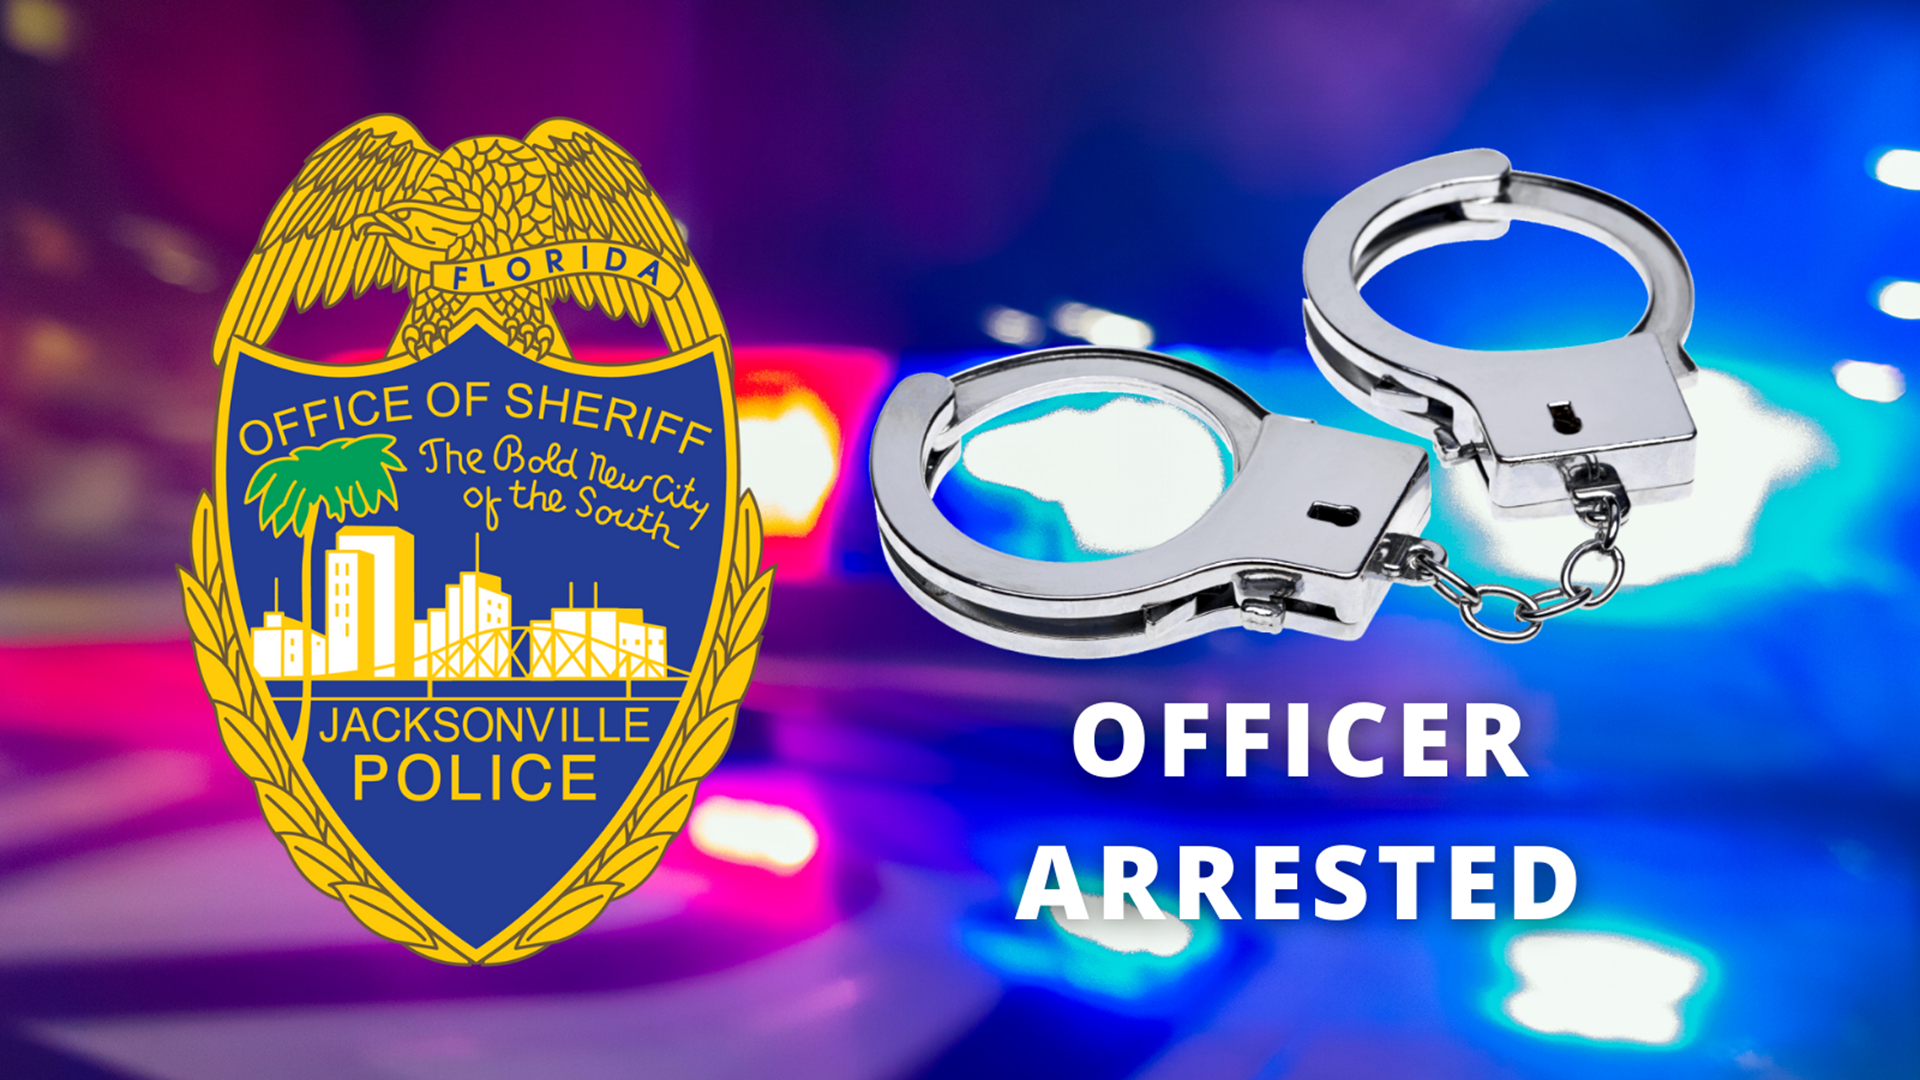 Officer Jordan Weiss, 22, was arrested on Saturday for one count of official misconduct, a third-degree felony, and one count of misdemeanor battery.